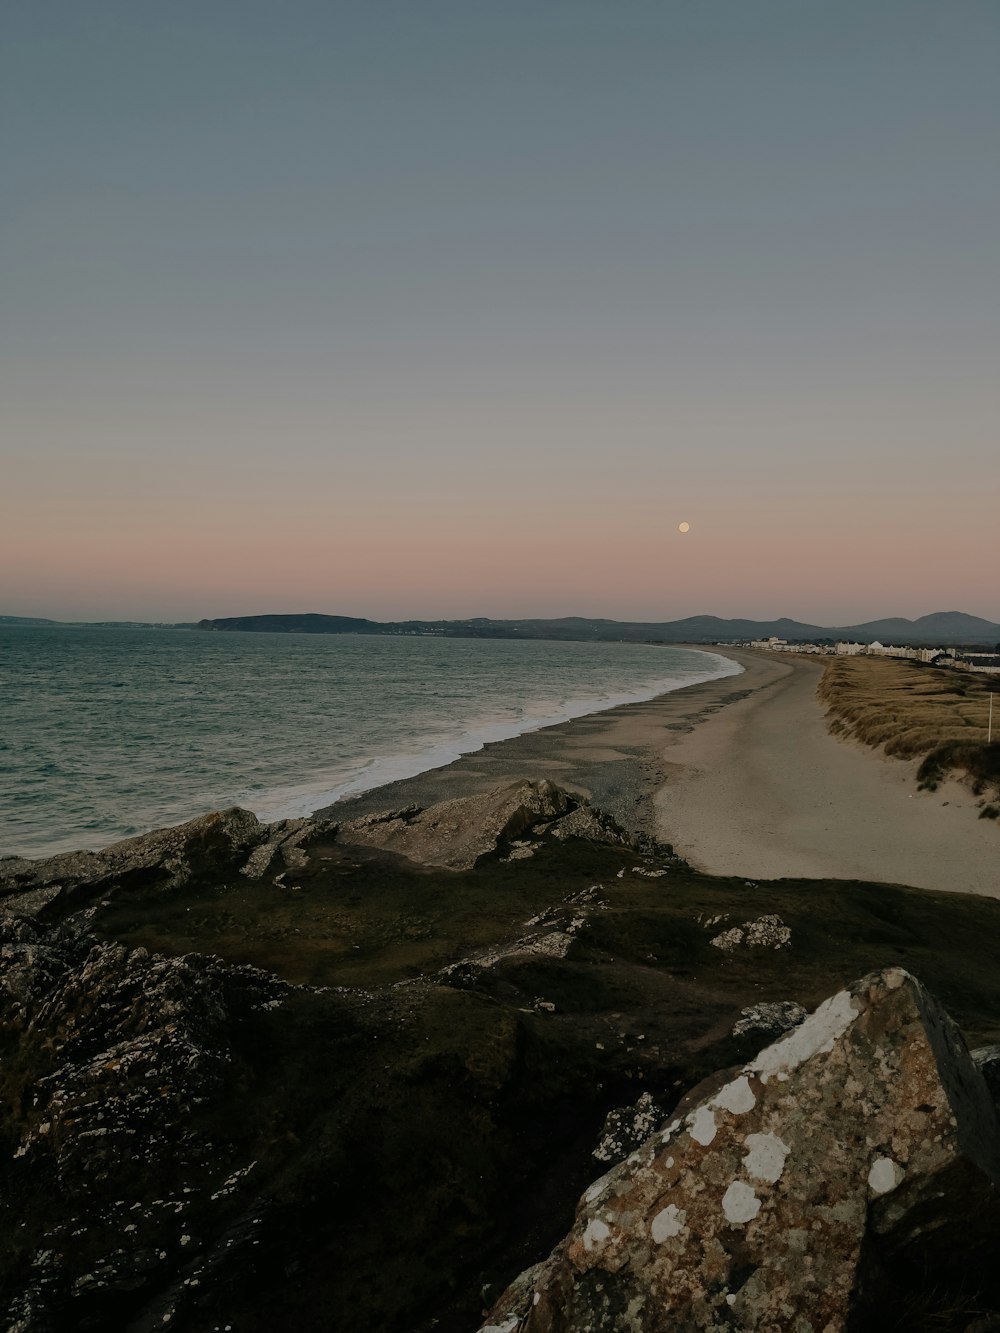 a view of a beach with a full moon in the distance